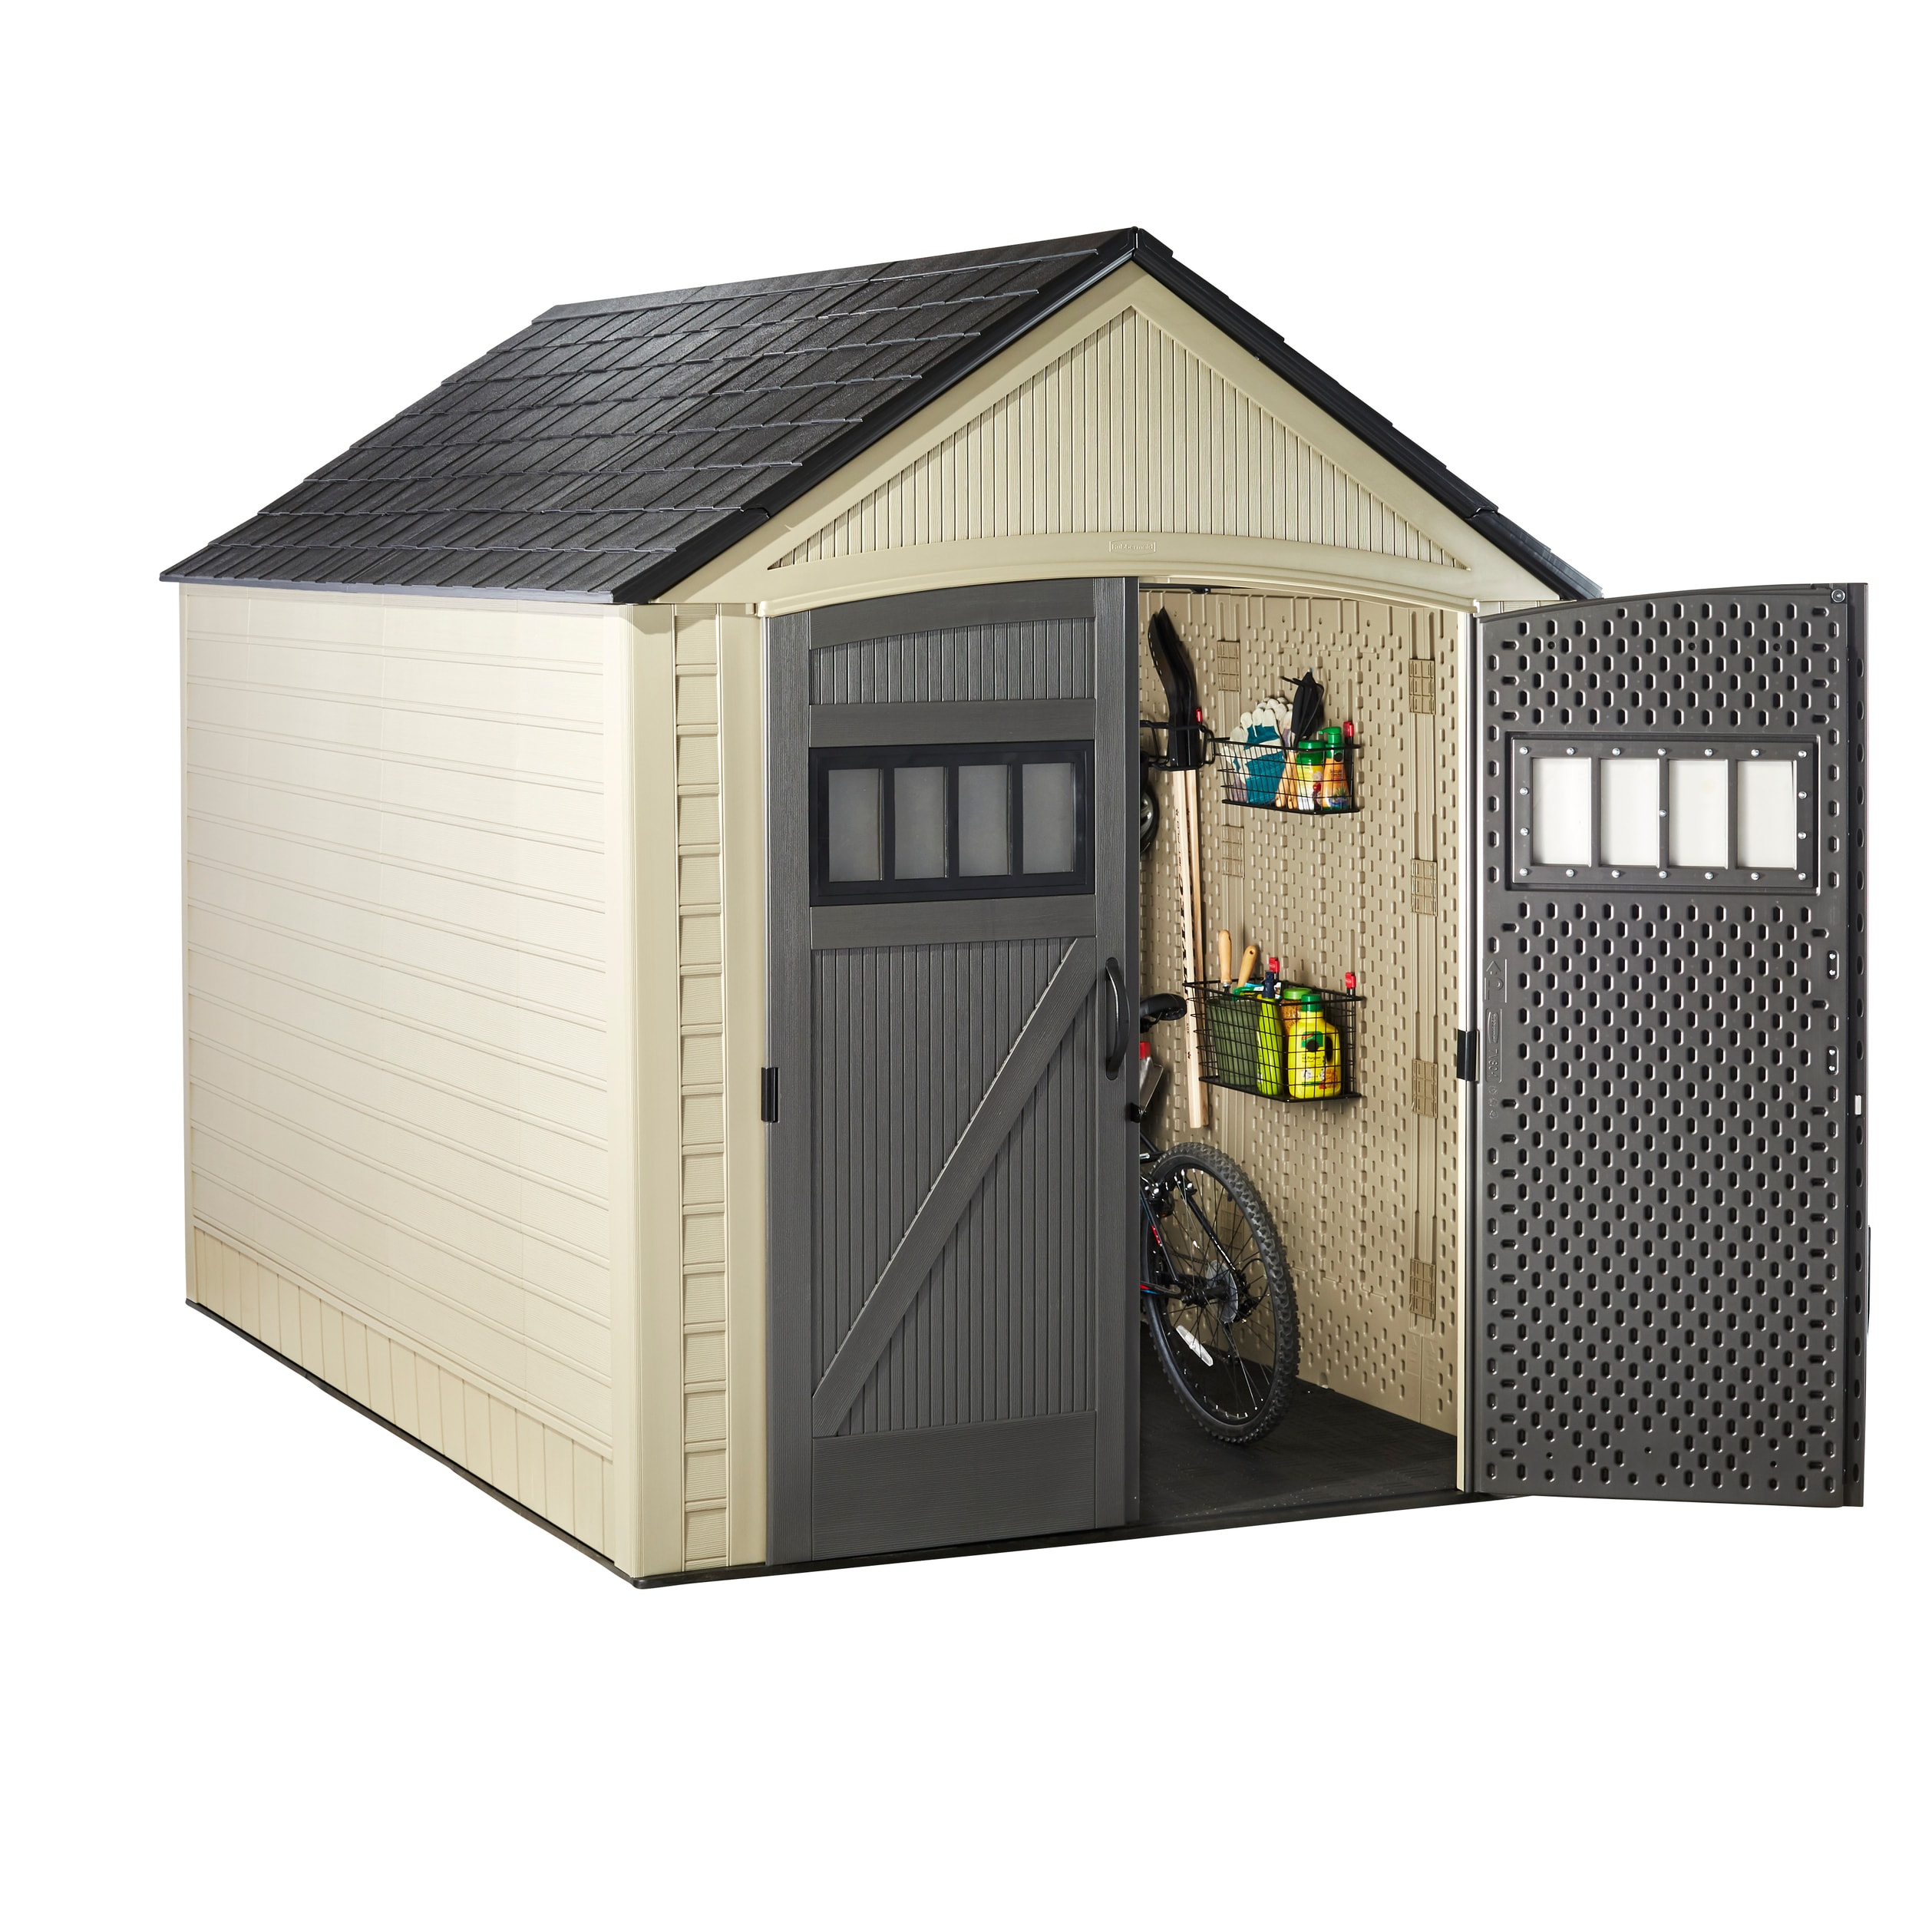 Rubbermaid 5x4 Ft Resin Weatherproof Outdoor Storage Shed, Canteen  Brown/Putty, 1 Piece - Ralphs